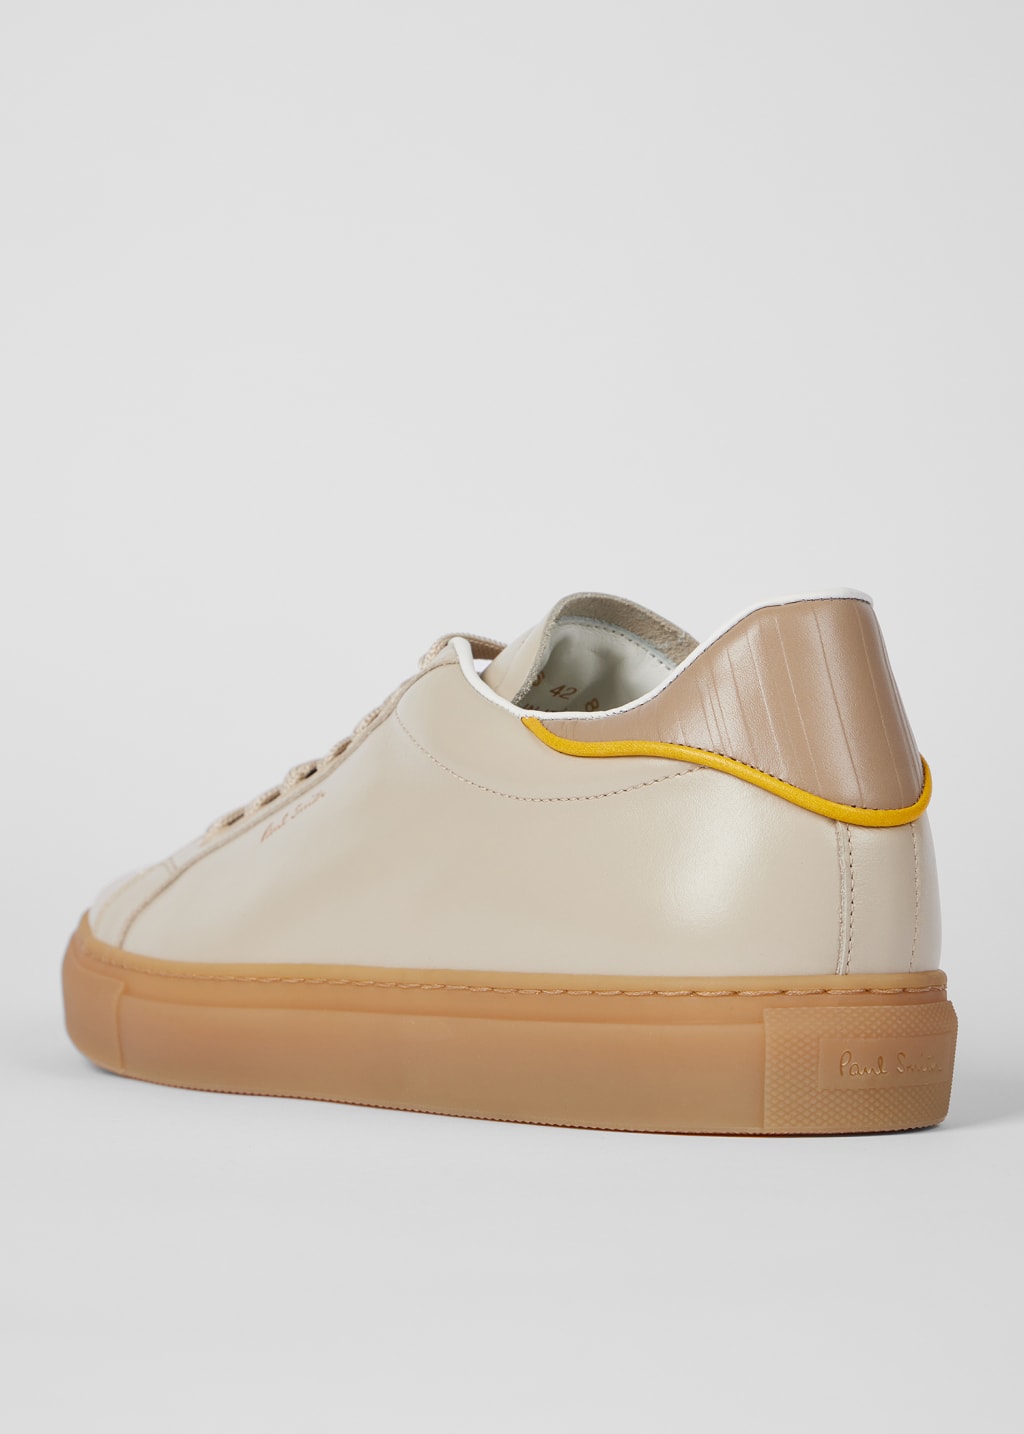 Detail View - Stone Leather 'Beck' Trainers Paul Smith